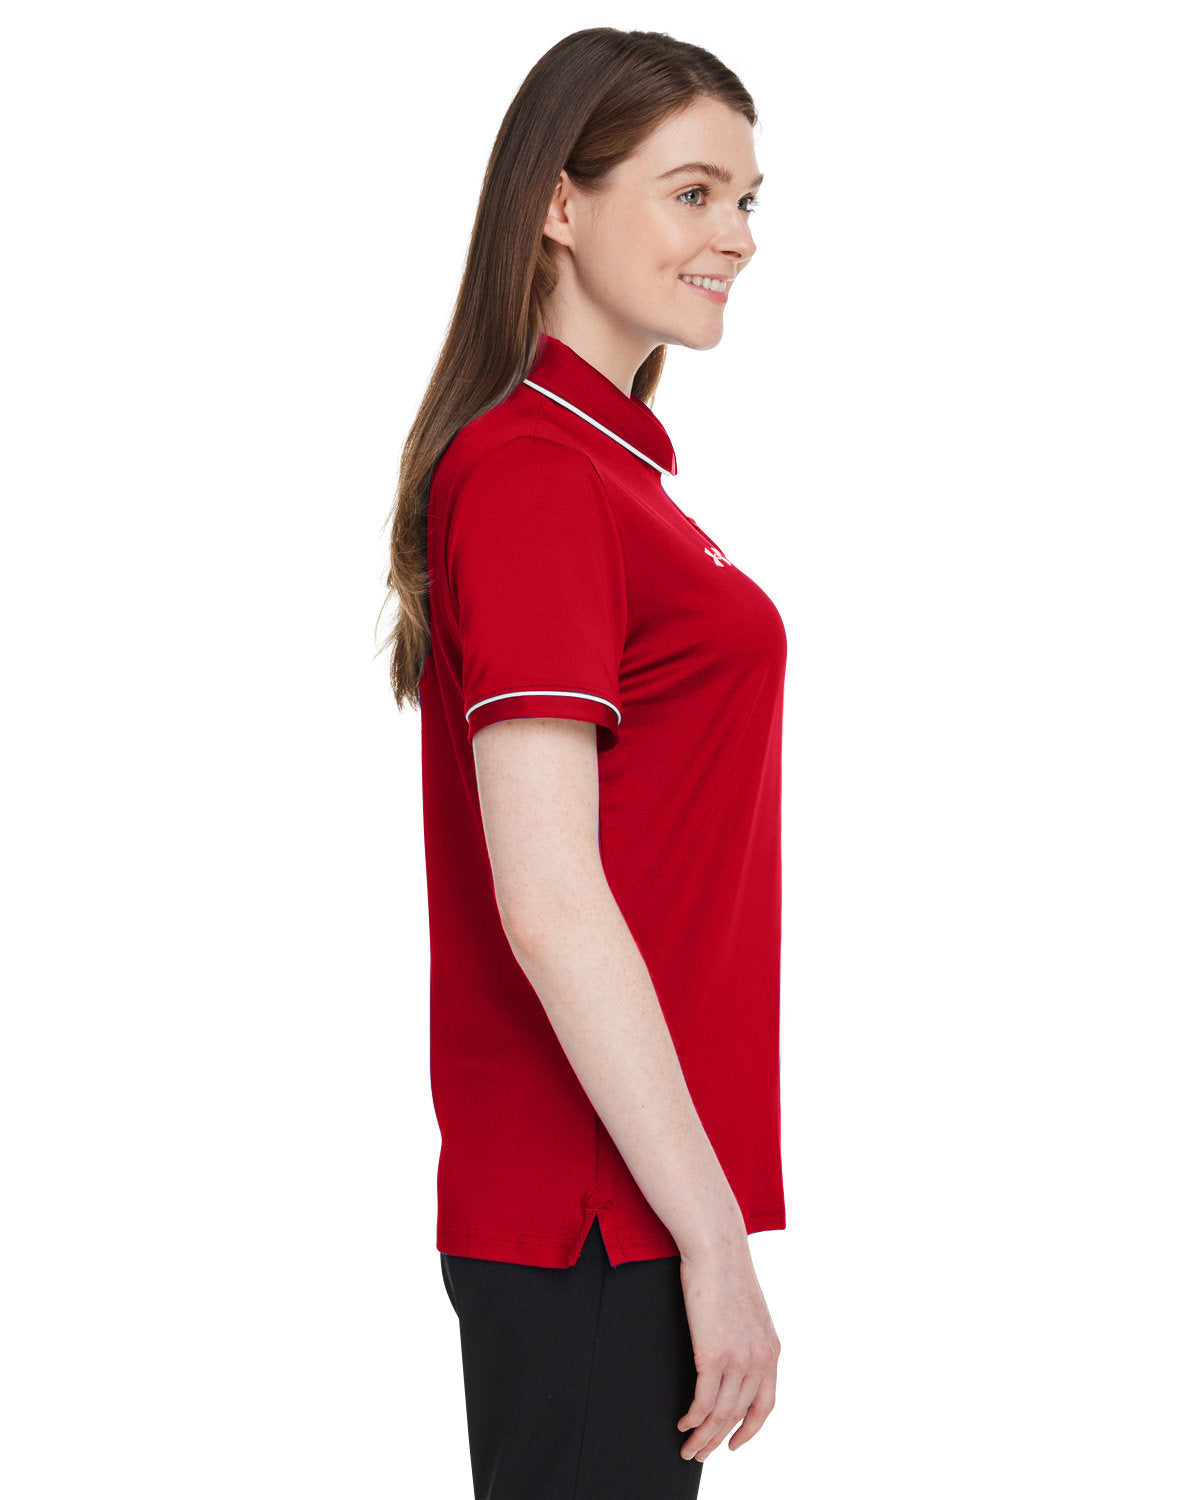 Under Armour Ladies Tipped Teams Performance Polo, Red